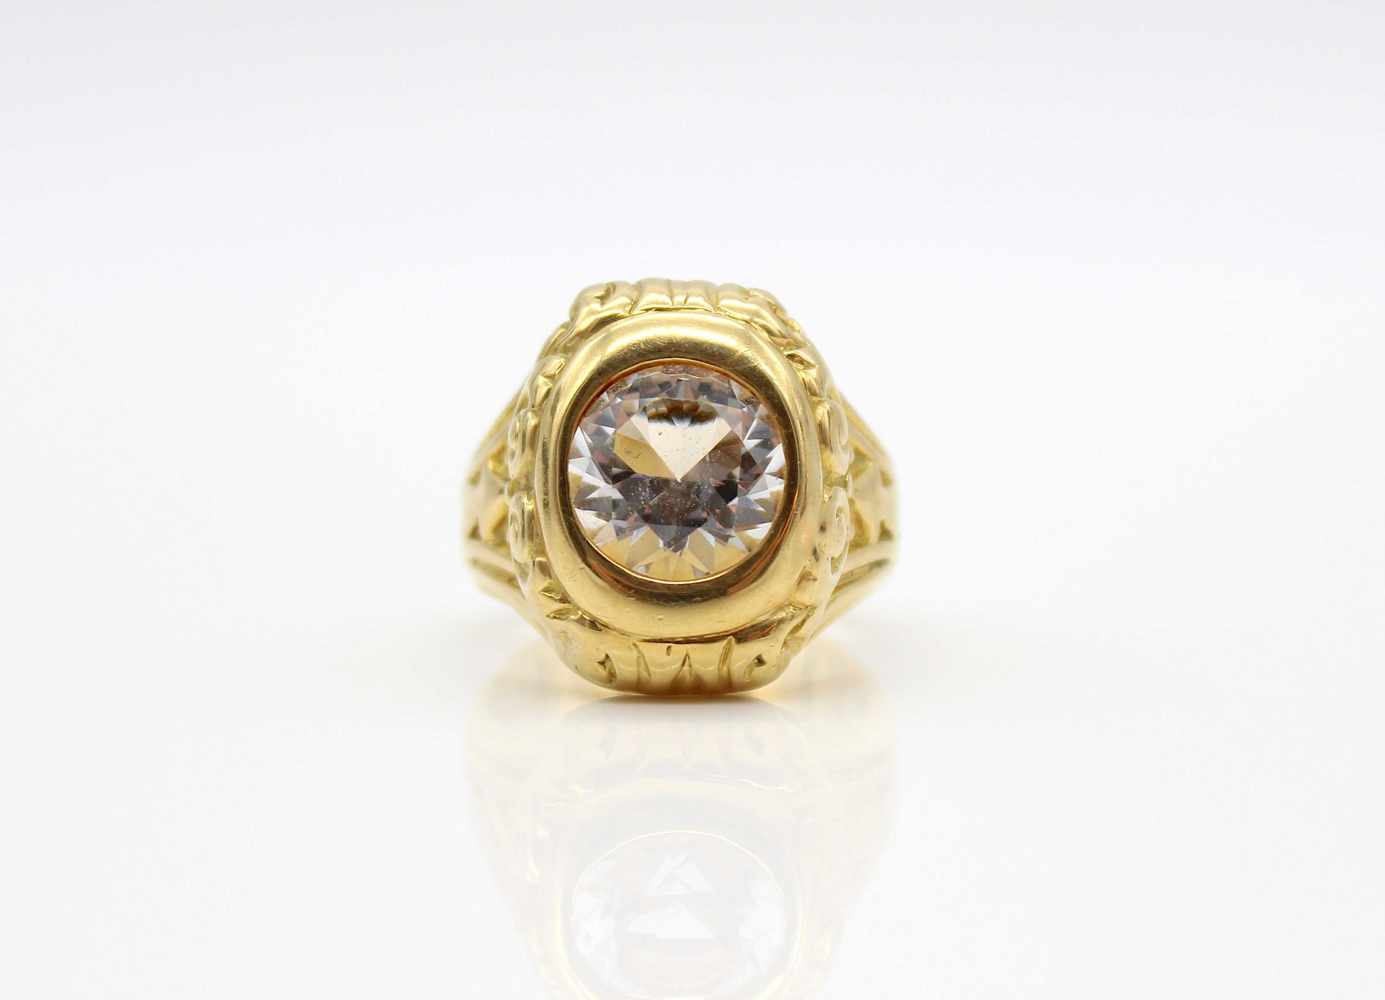 Ring of 750 gold with a topaz.Weight 24.5 g, size 60- - -15.00 % buyer's premium on the hammer - Image 2 of 3